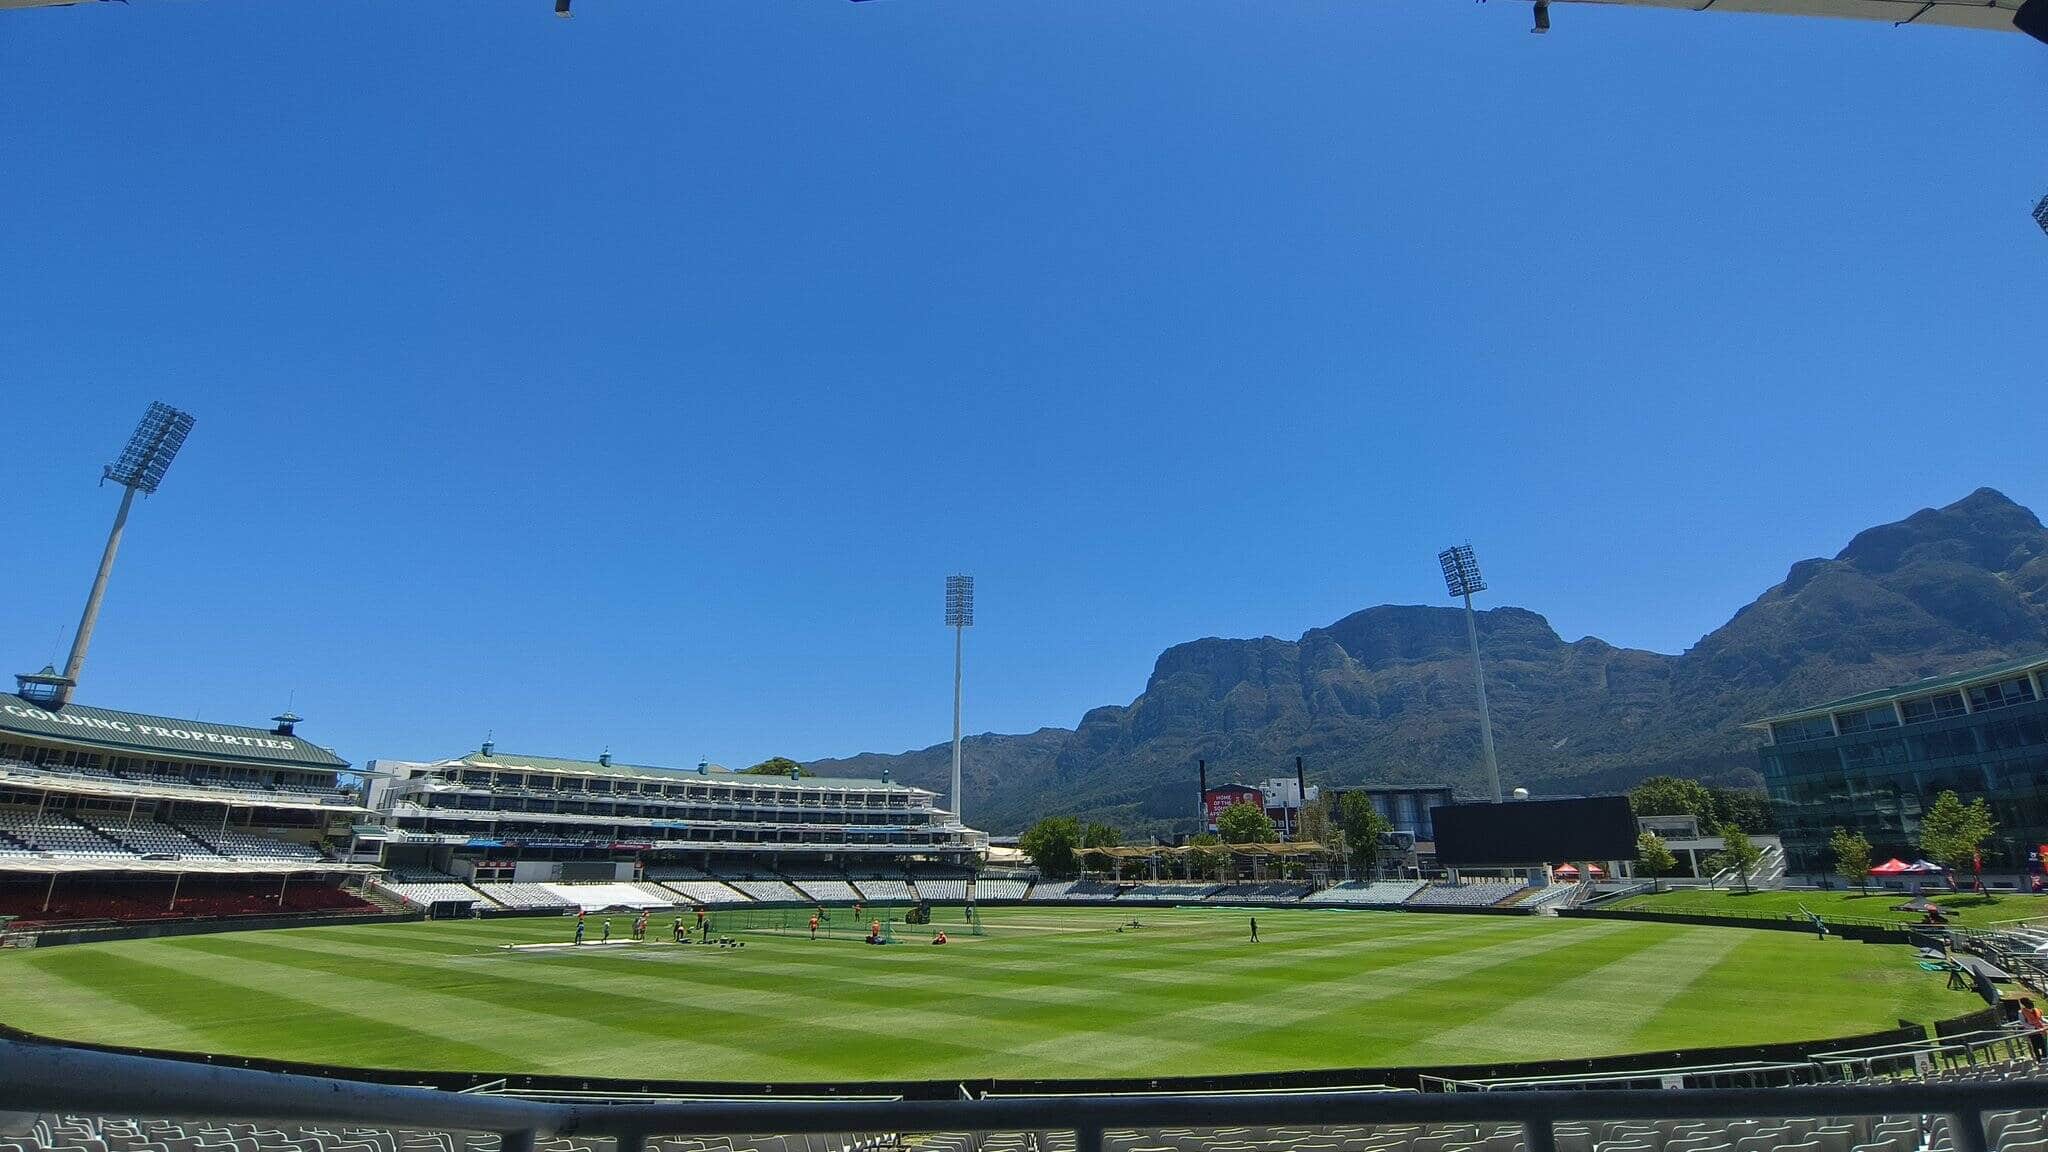 Newlands Cape Town Ground Stats For SA vs IND 2nd Test